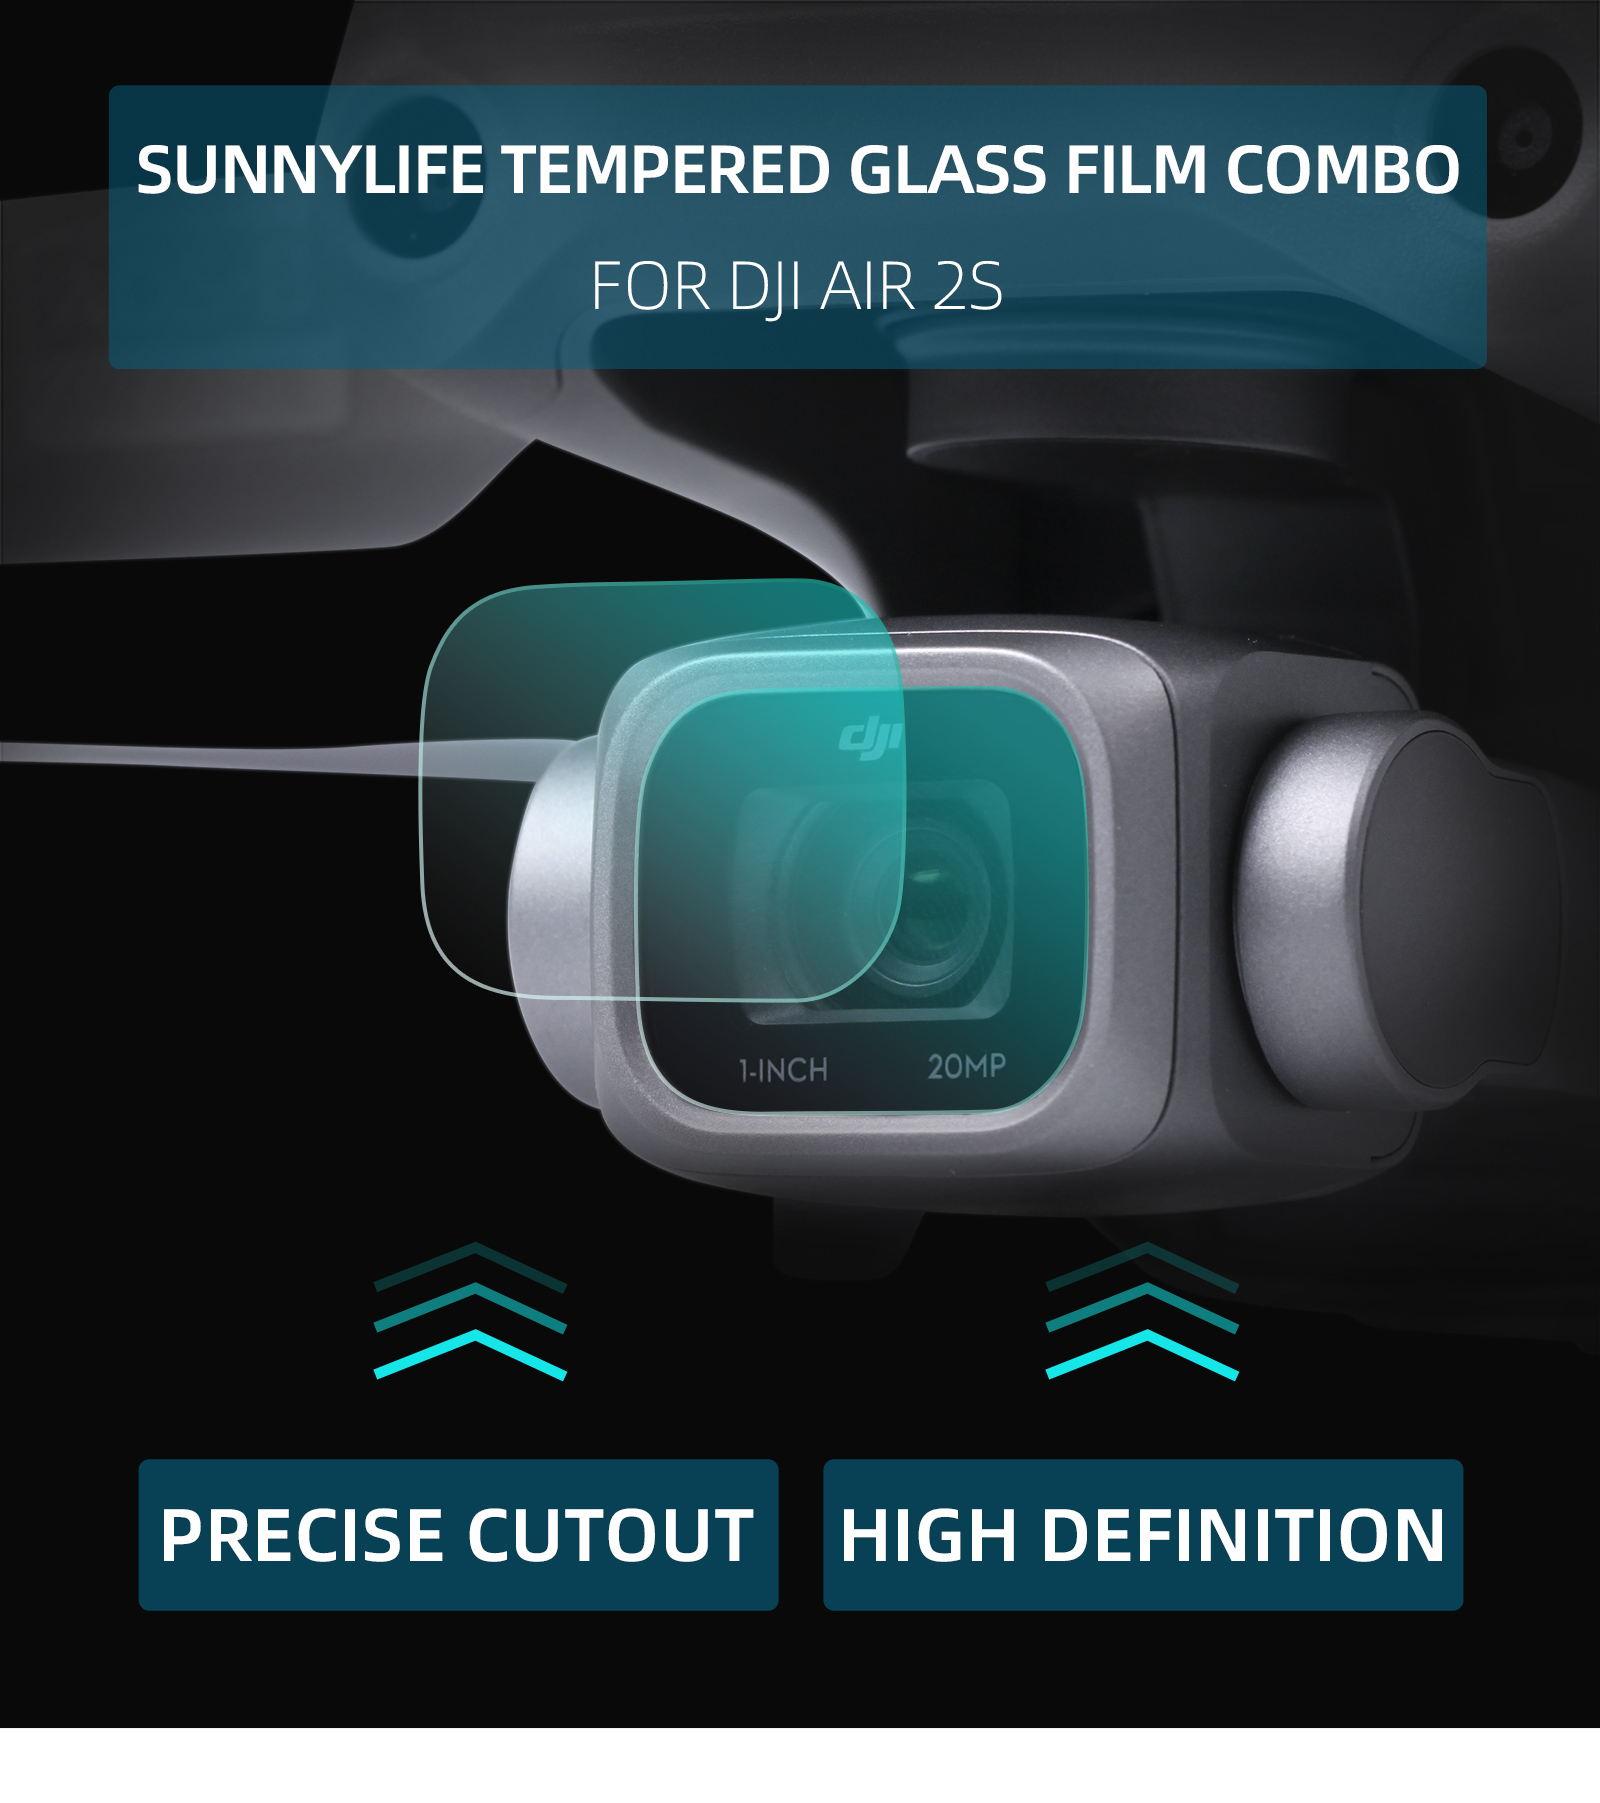 Sunnylife Tempered Glass Film Combo Explosion-proof Camera Protective Film for DJI Mavic Air 2S RC Quadcopter